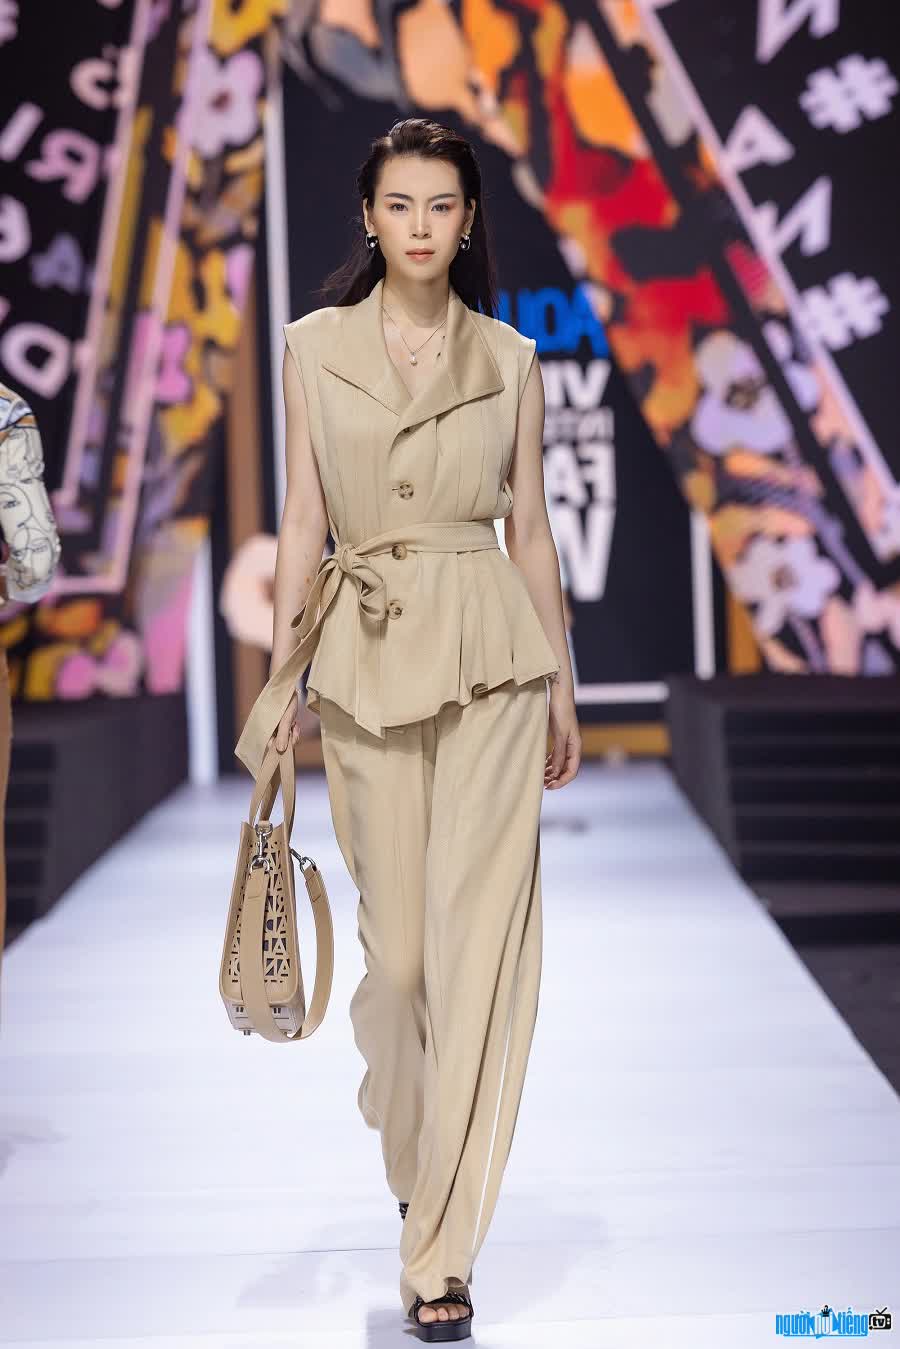  Image of model Luong Thuy Duong on the catwalk